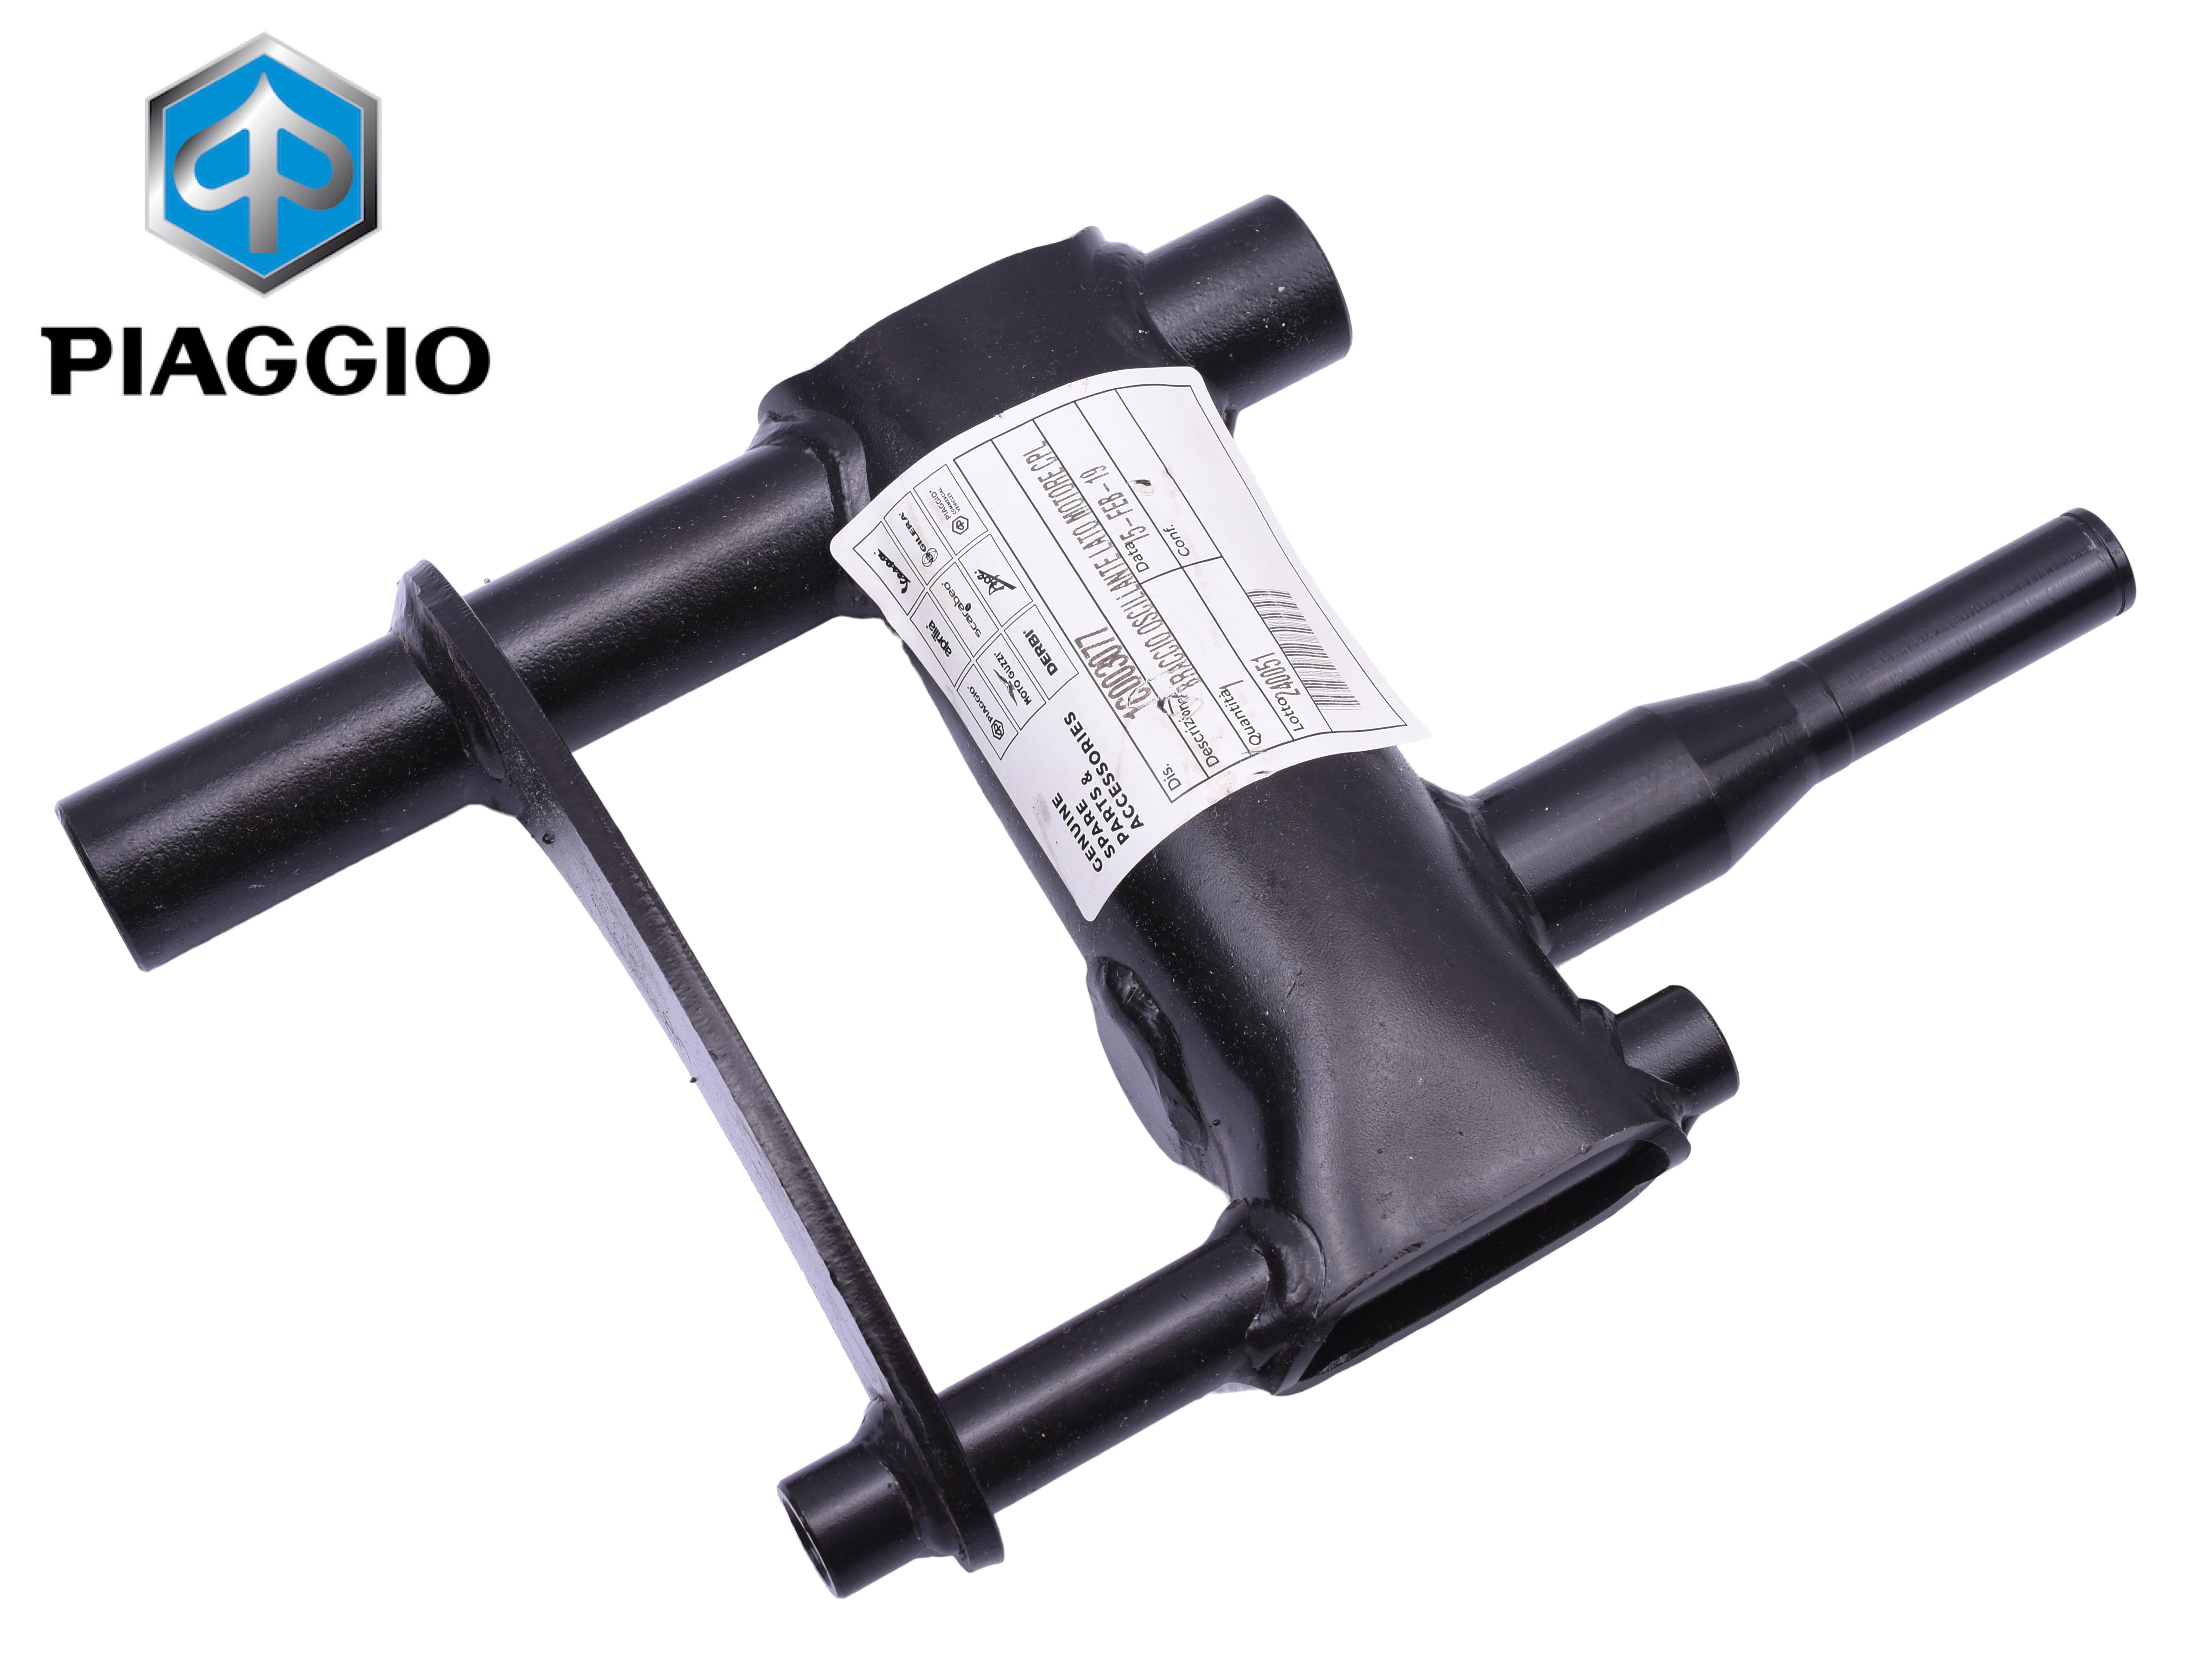 Motorblok Ophanging OEM Compleet | Piaggio Zip 4T 3V AE-trading